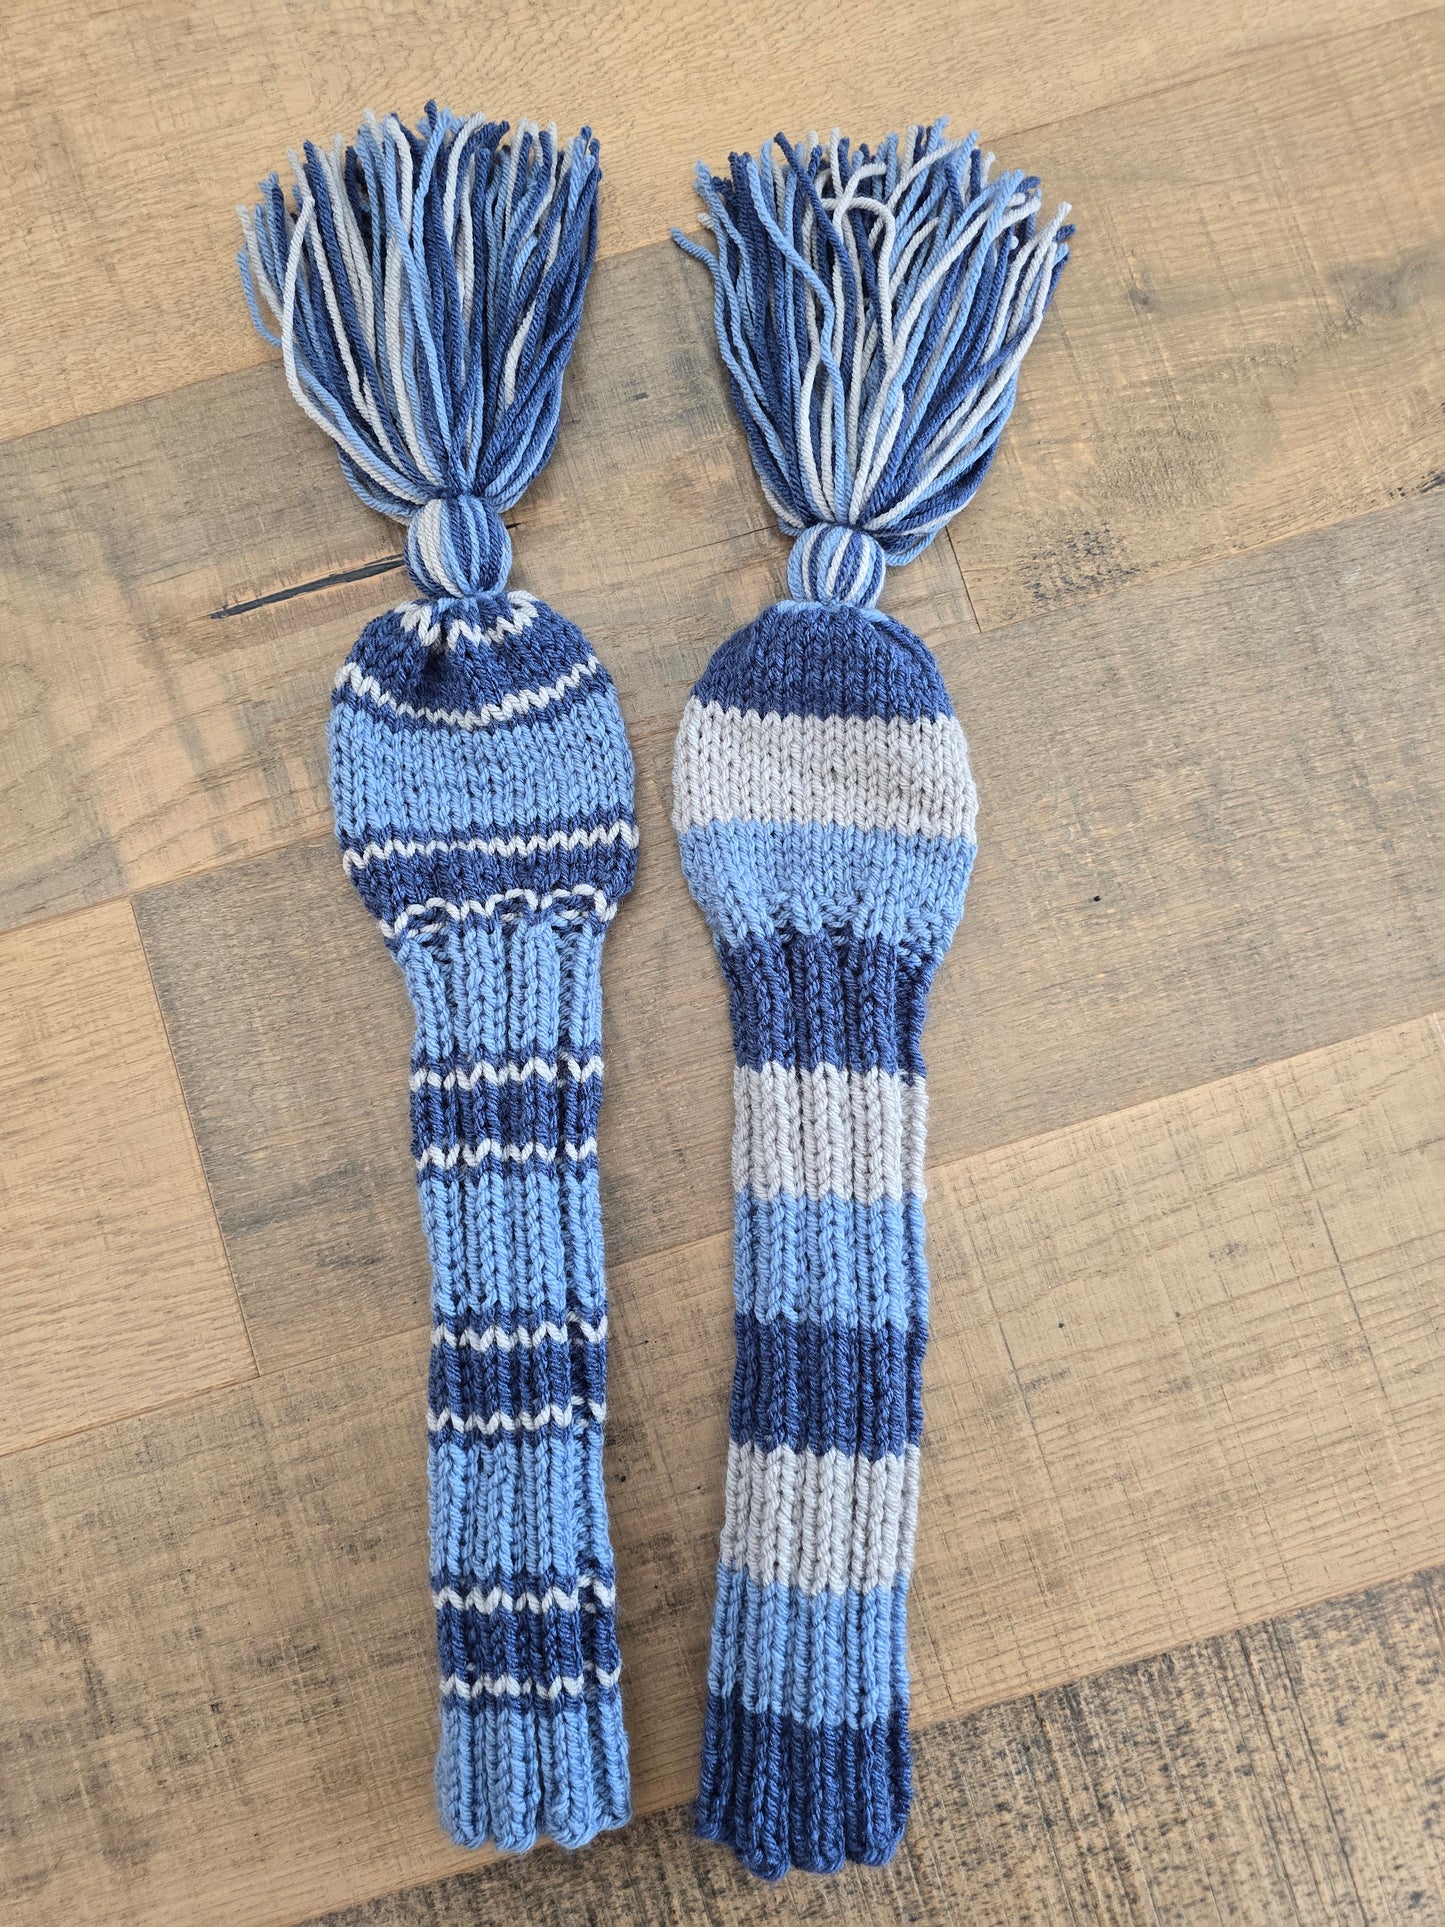 Two Golf Club Head Covers Retro-Vintage Ombre Blue & Gray with Tassels for Fairway Woods